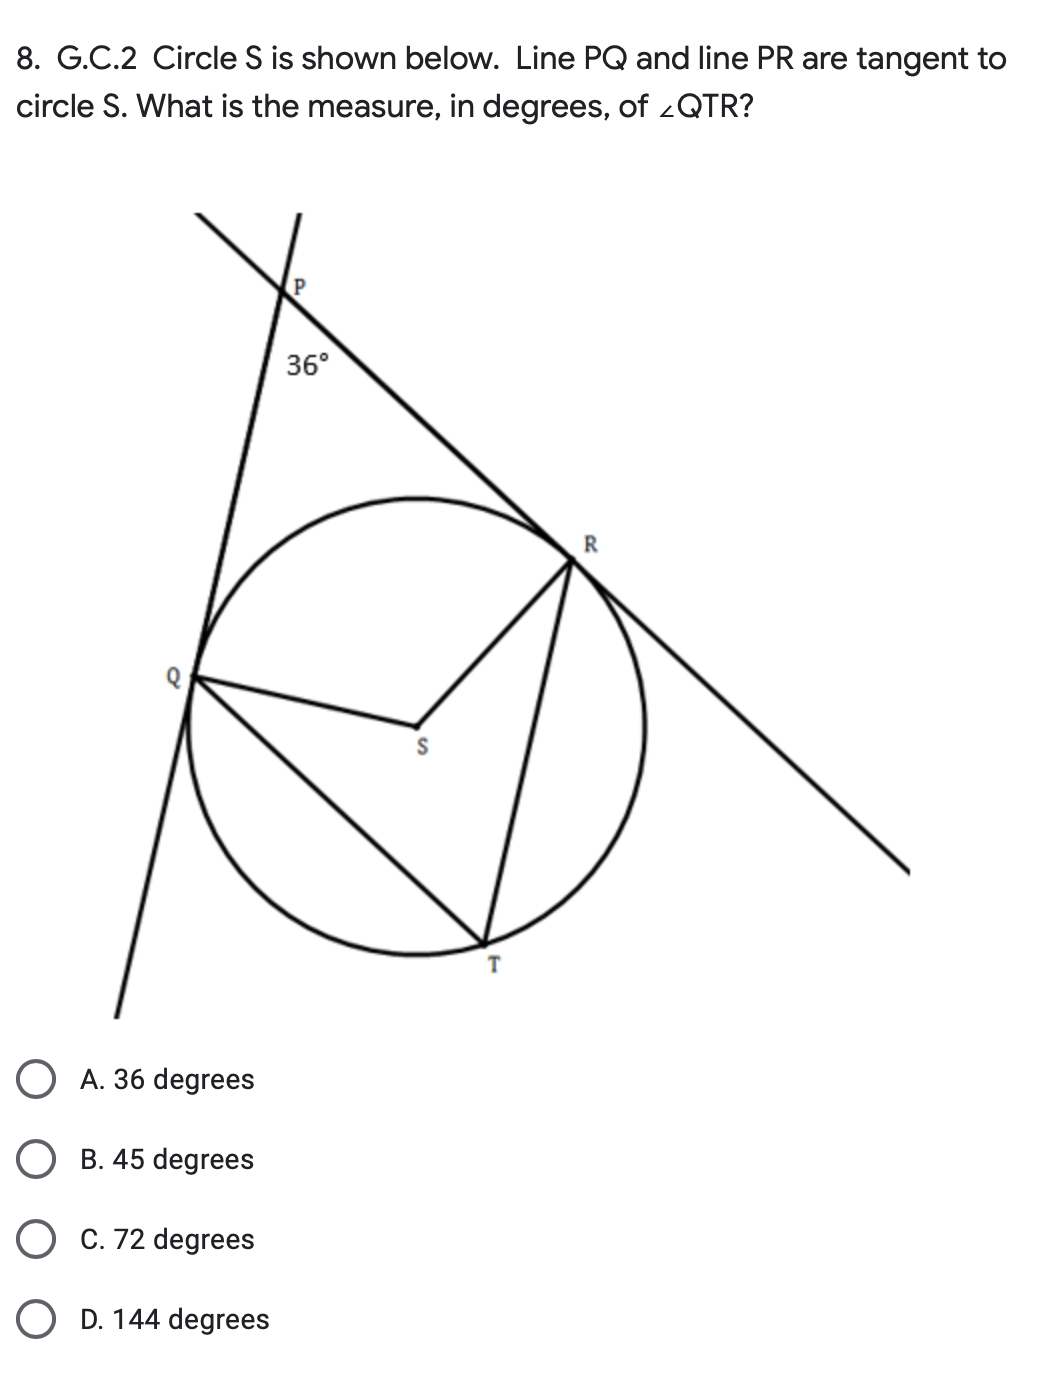 8. G.C.2 Circle S is shown below. Line PQ and line PR are tangent to
circle S. What is the measure, degrees, of QTR?
A. 36 degrees
B. 45 degrees
C. 72 degrees
OD. 144 degrees
P
36°
S
T
R